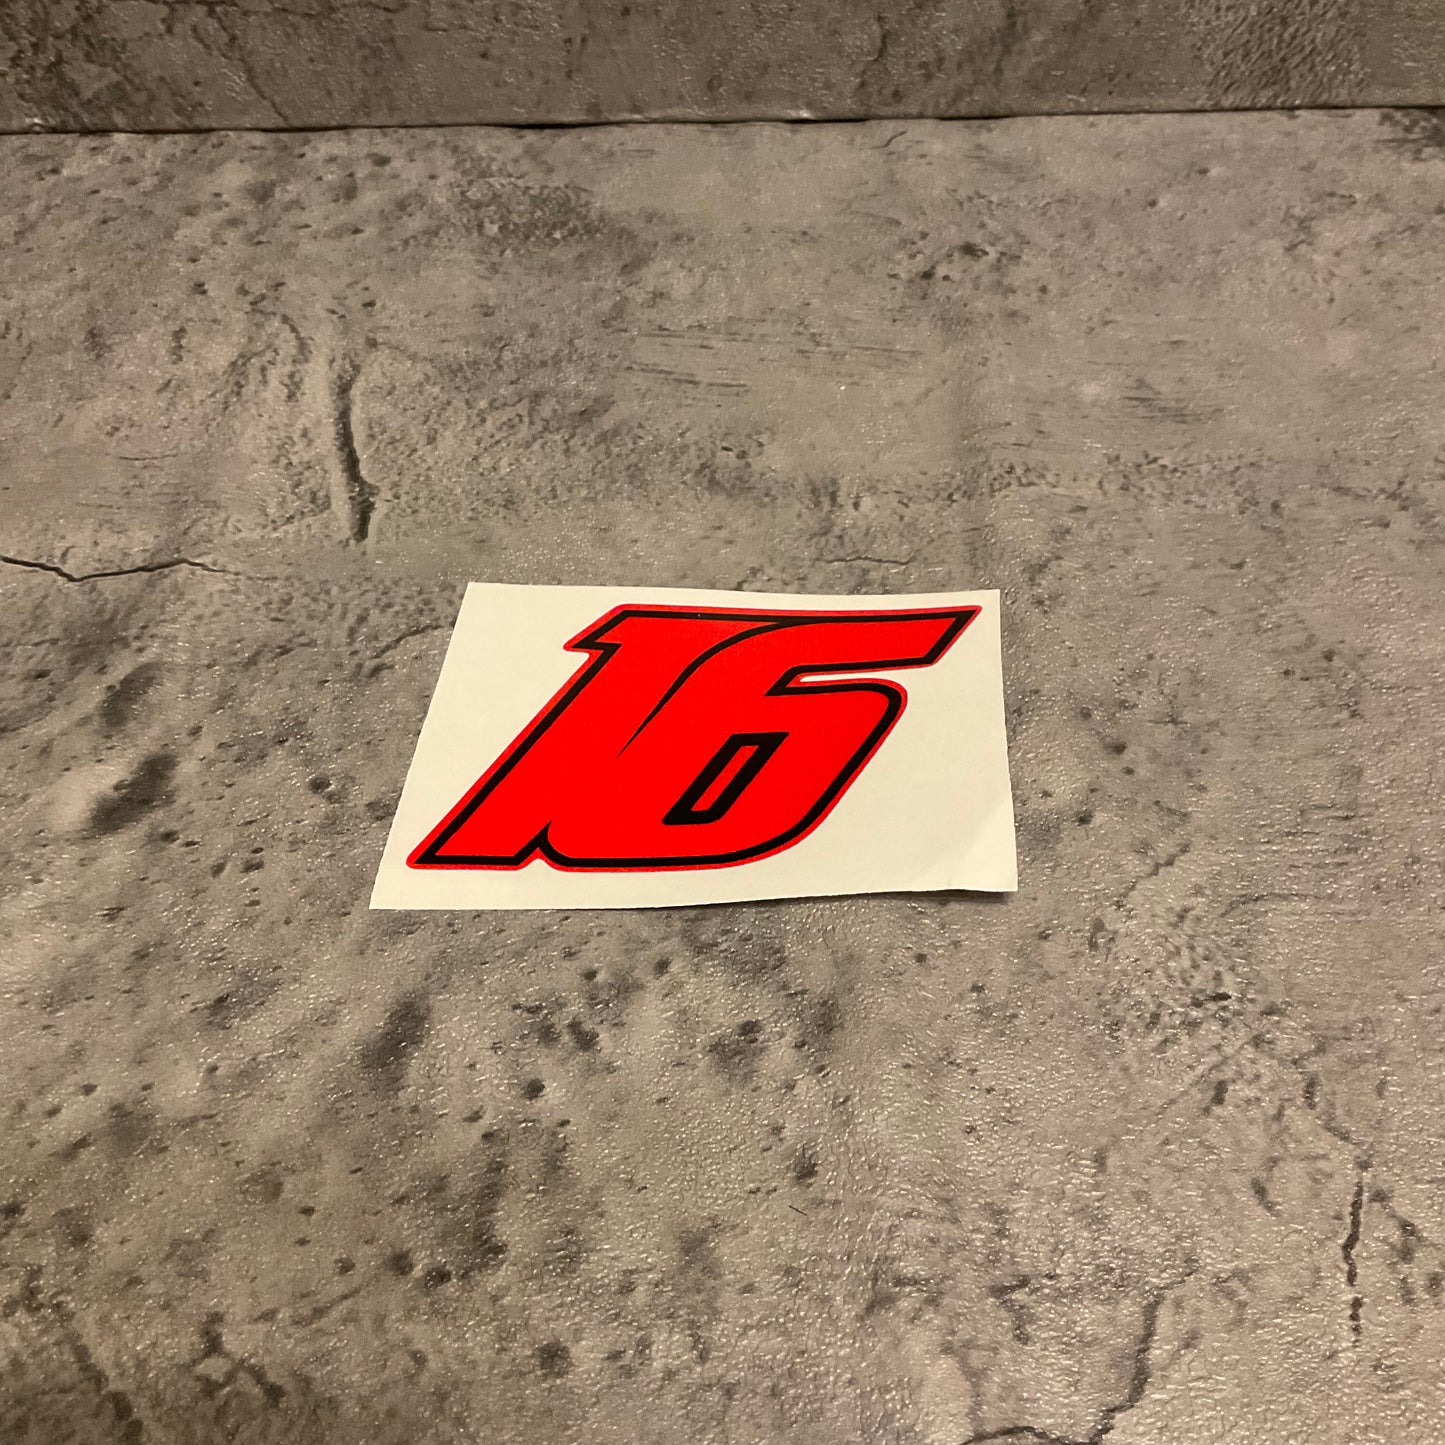 3M High End Stickers - F1 Drivers, Teams and Sponsors